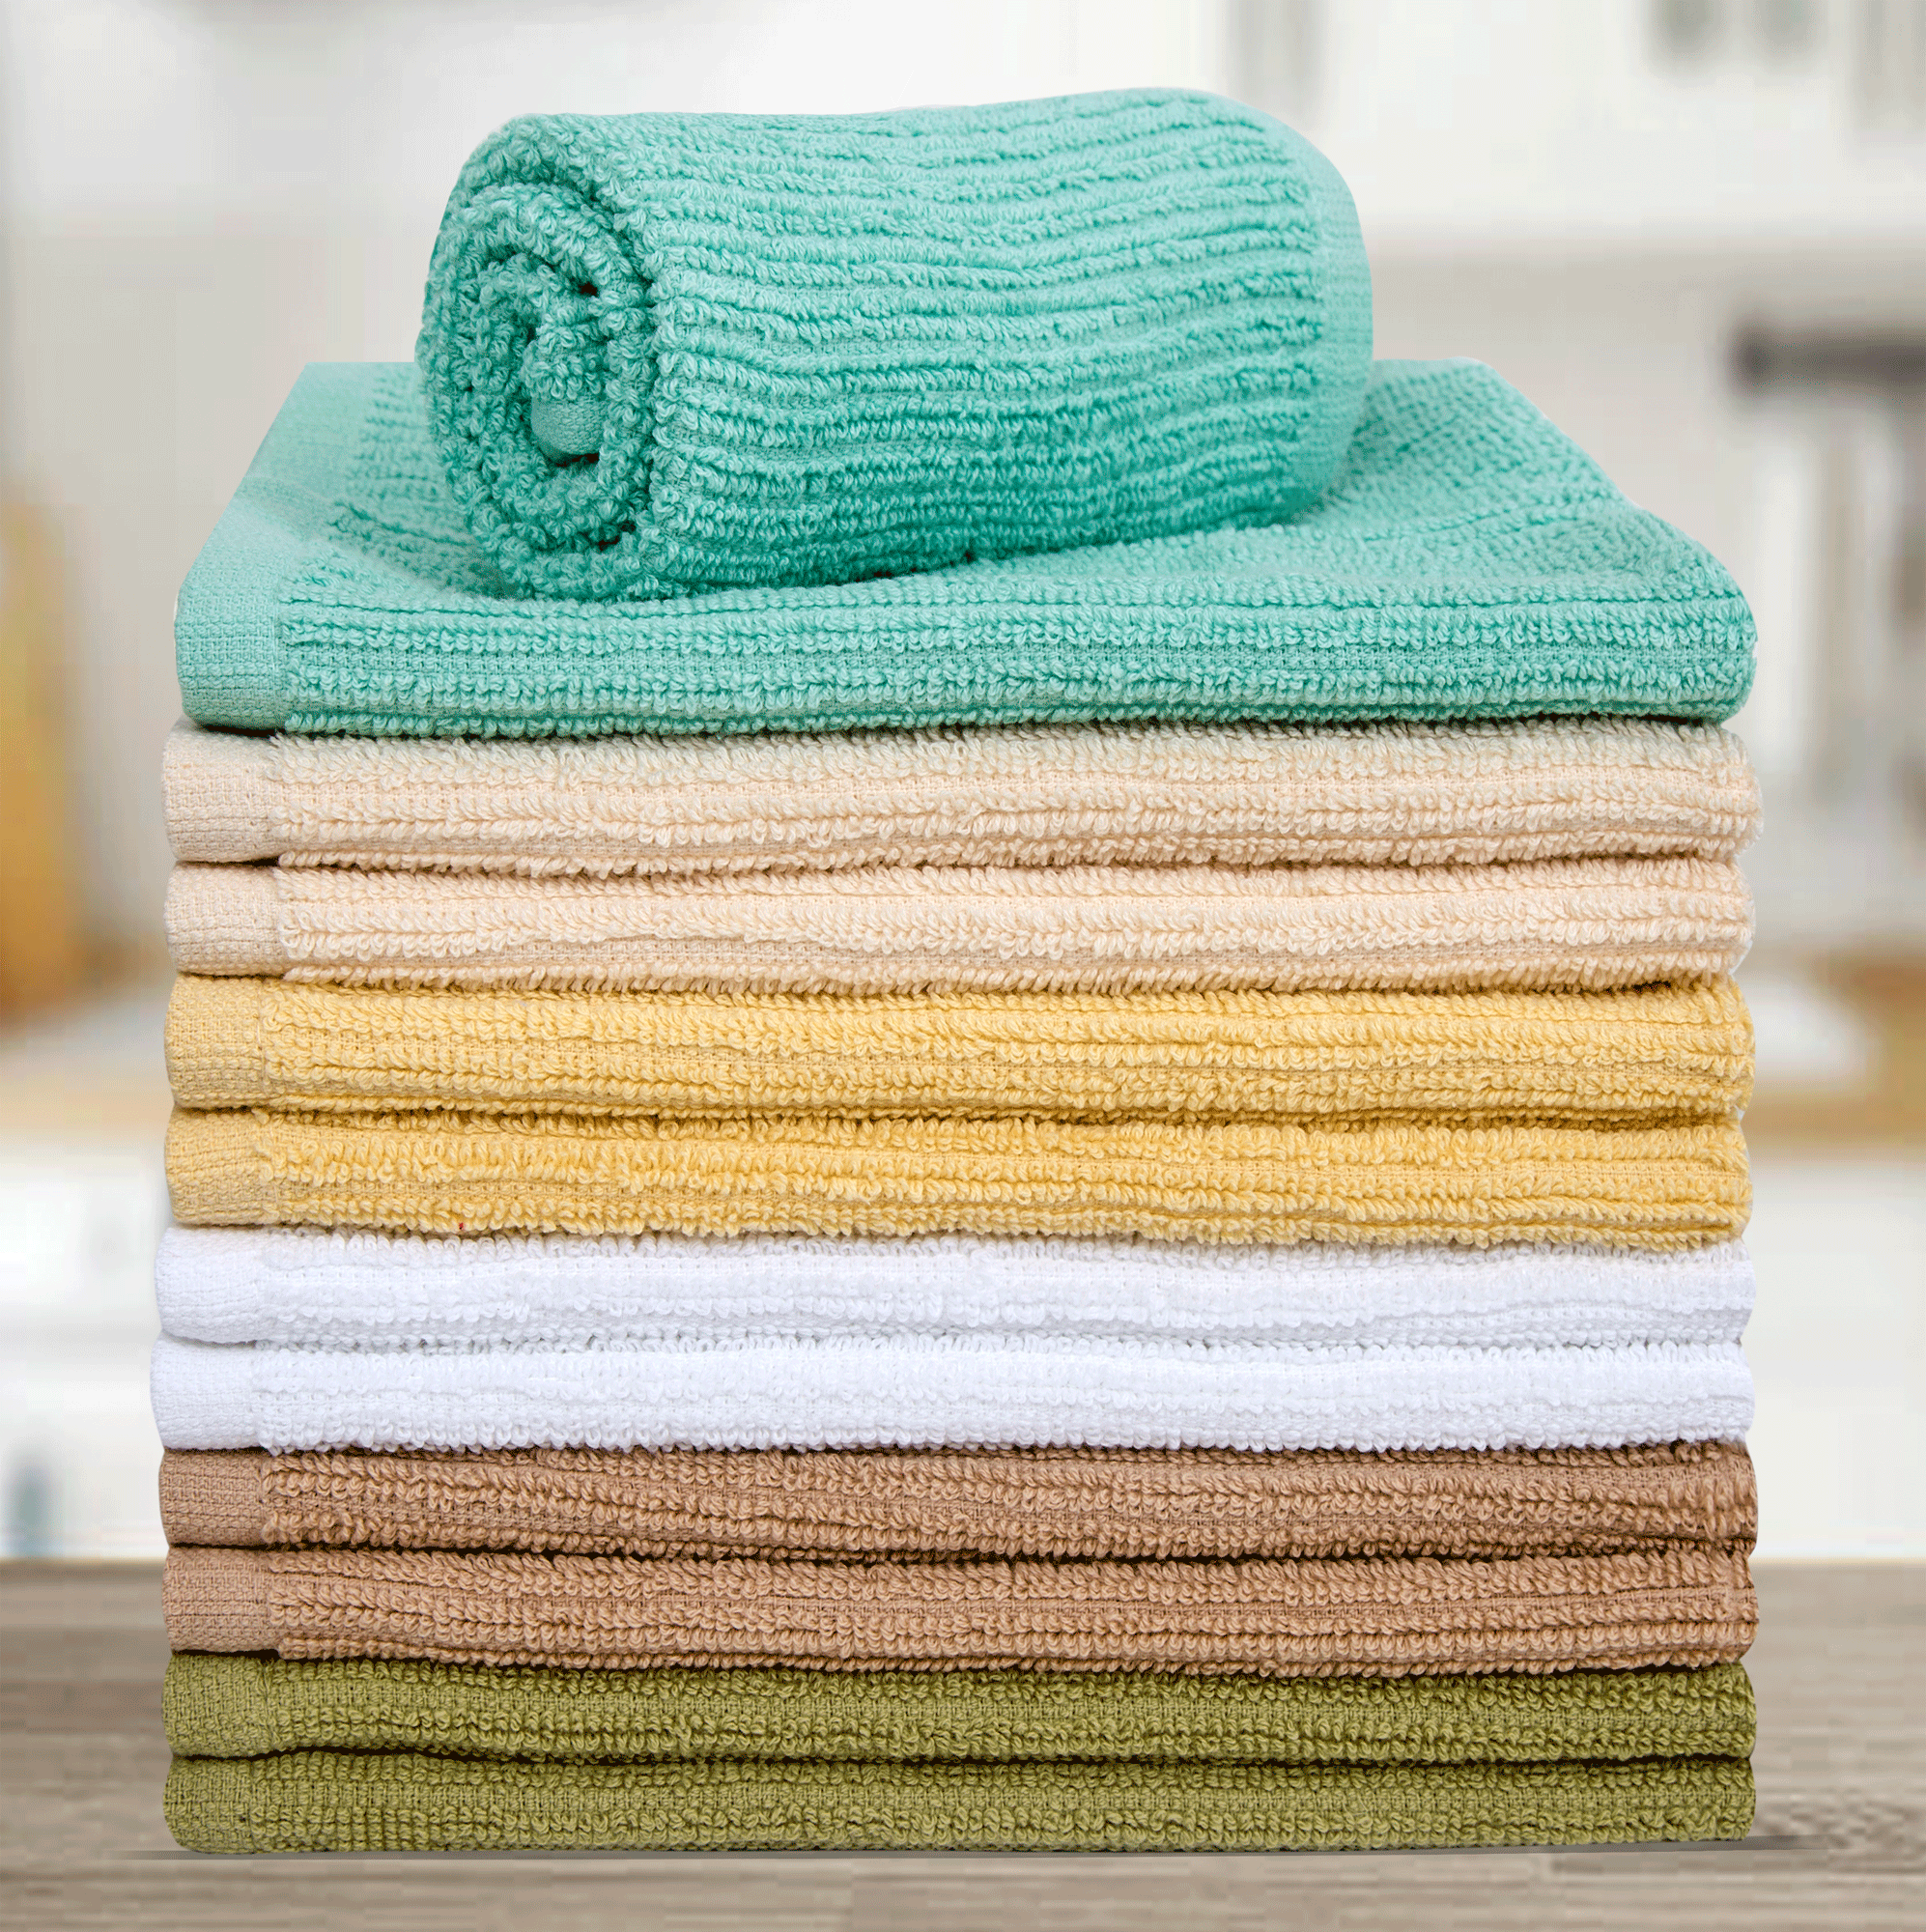 8 Uses Of Bar Mop Towels You Can't Afford To Ignore – Advanced Mixology